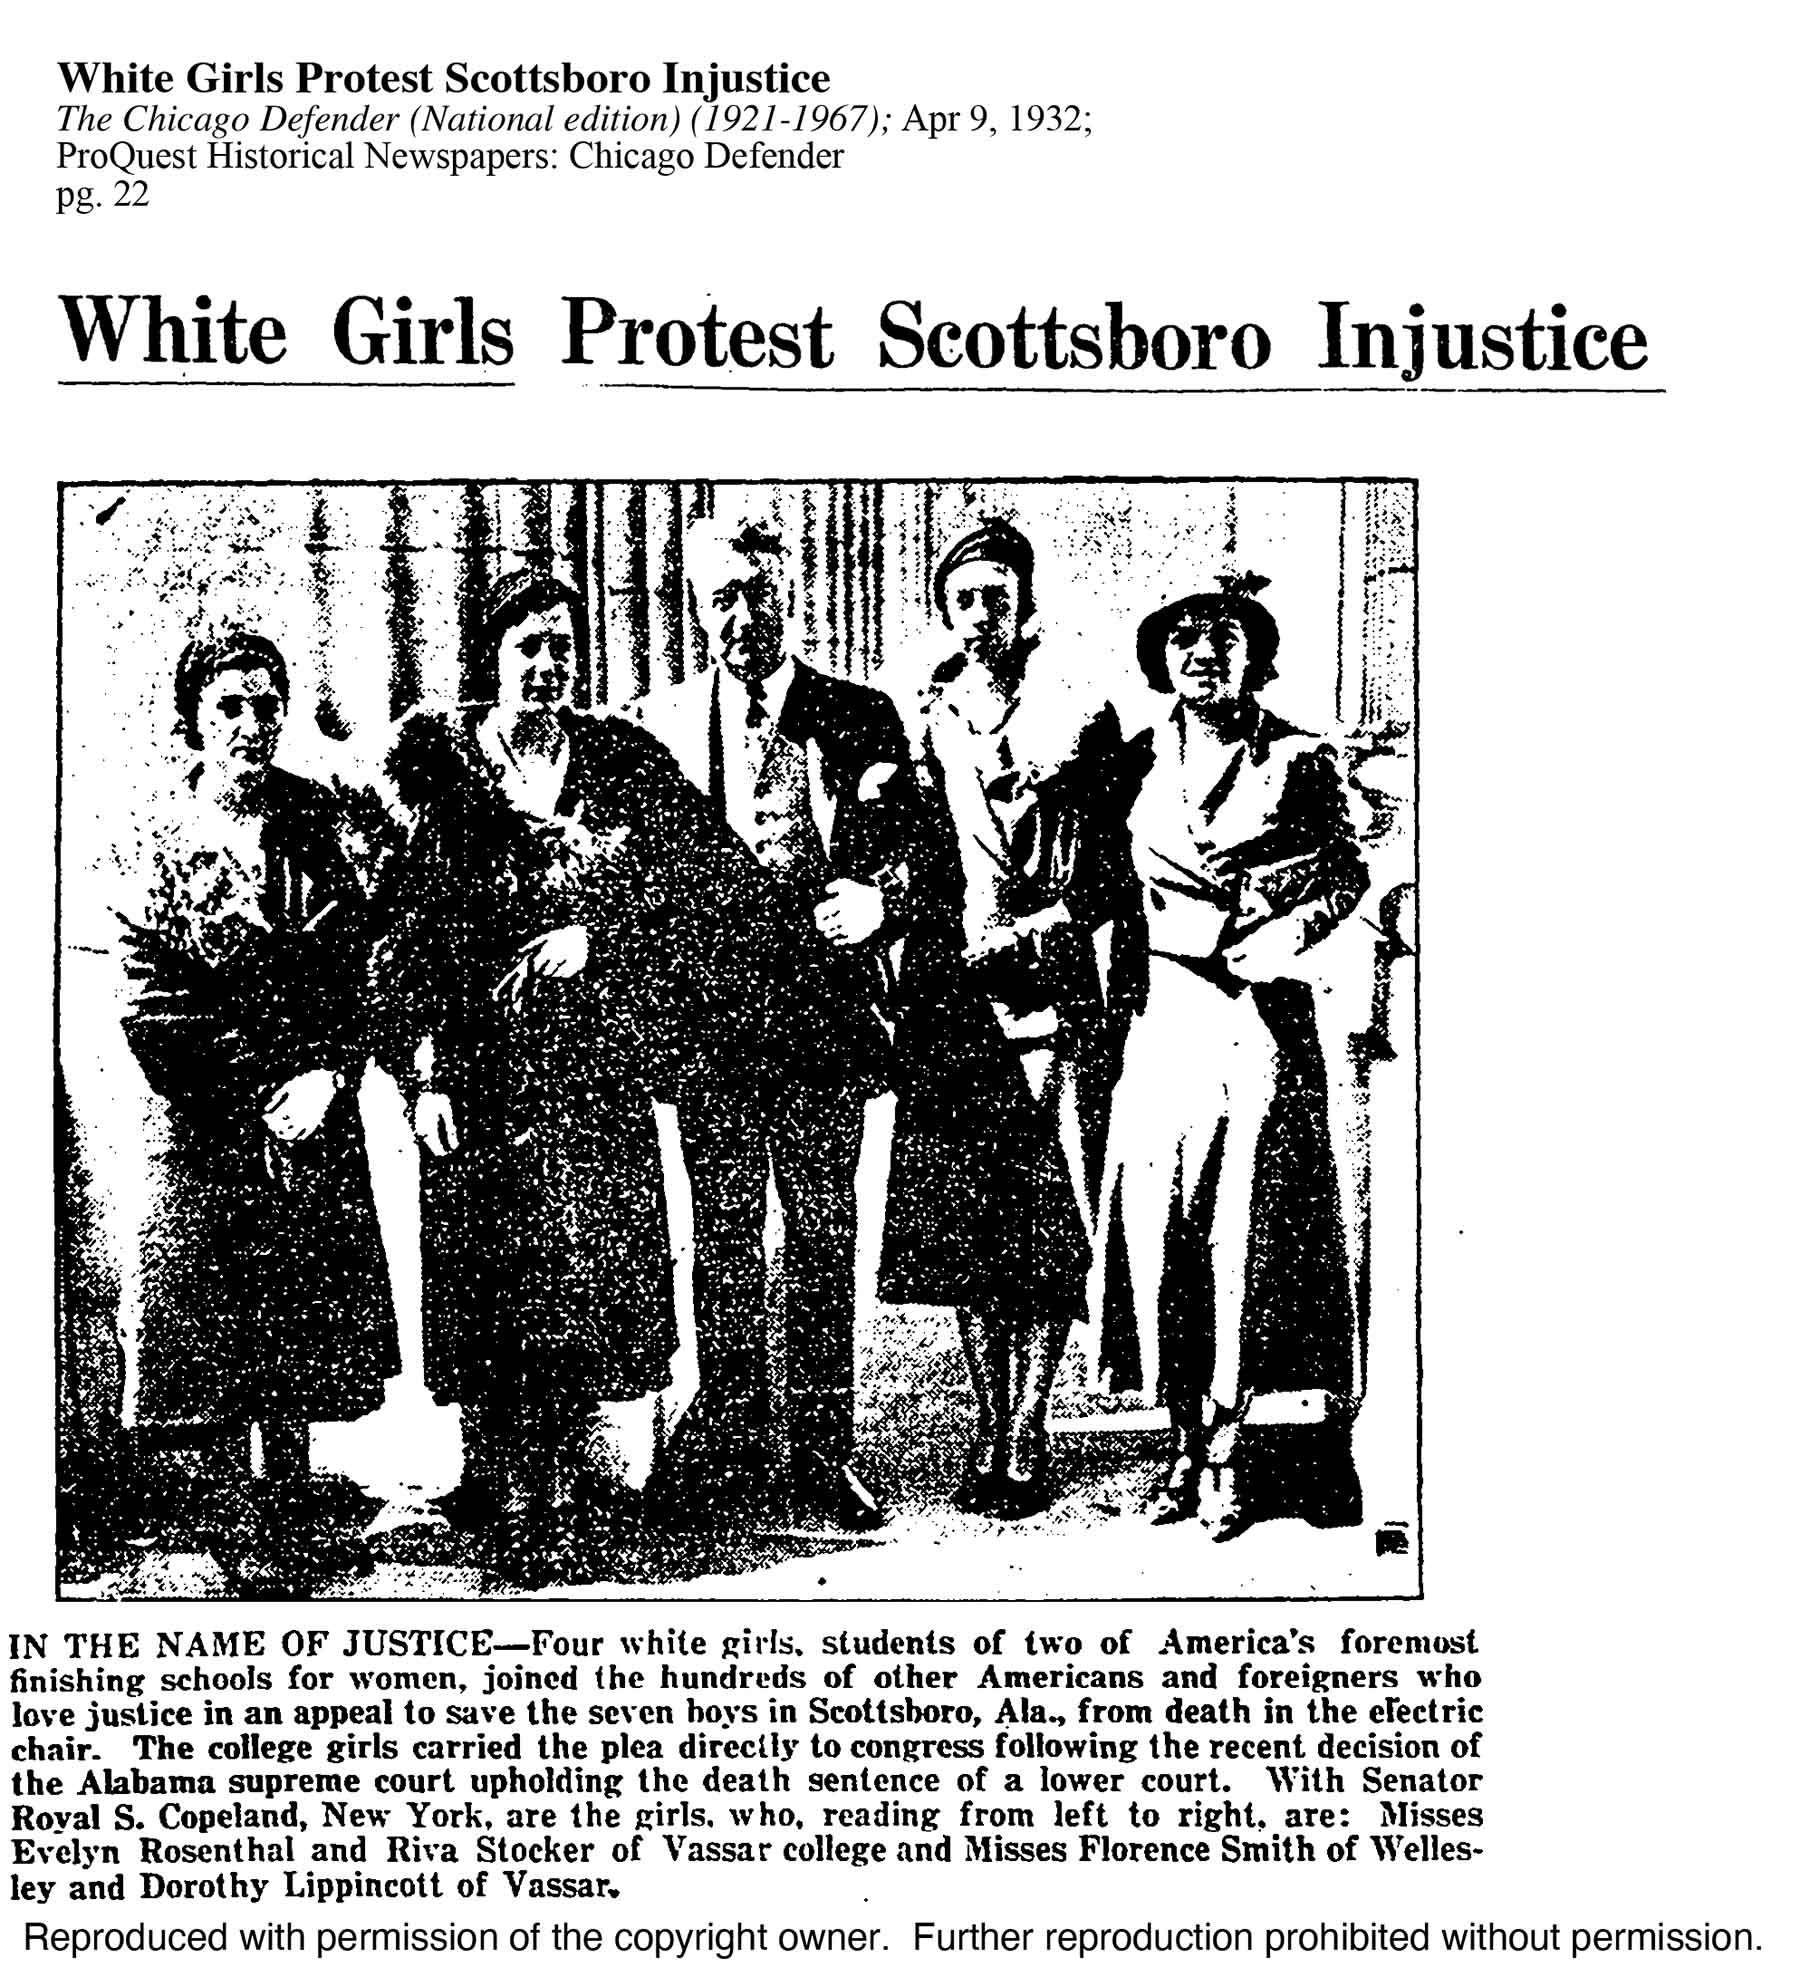 Original article scan for White Girls Protest Scottsboro Injustice; The Chicago Defender (National edition) (1921-1967); Apr 9, 1932; ProQuest Historical Newspapers: Chicago Defender